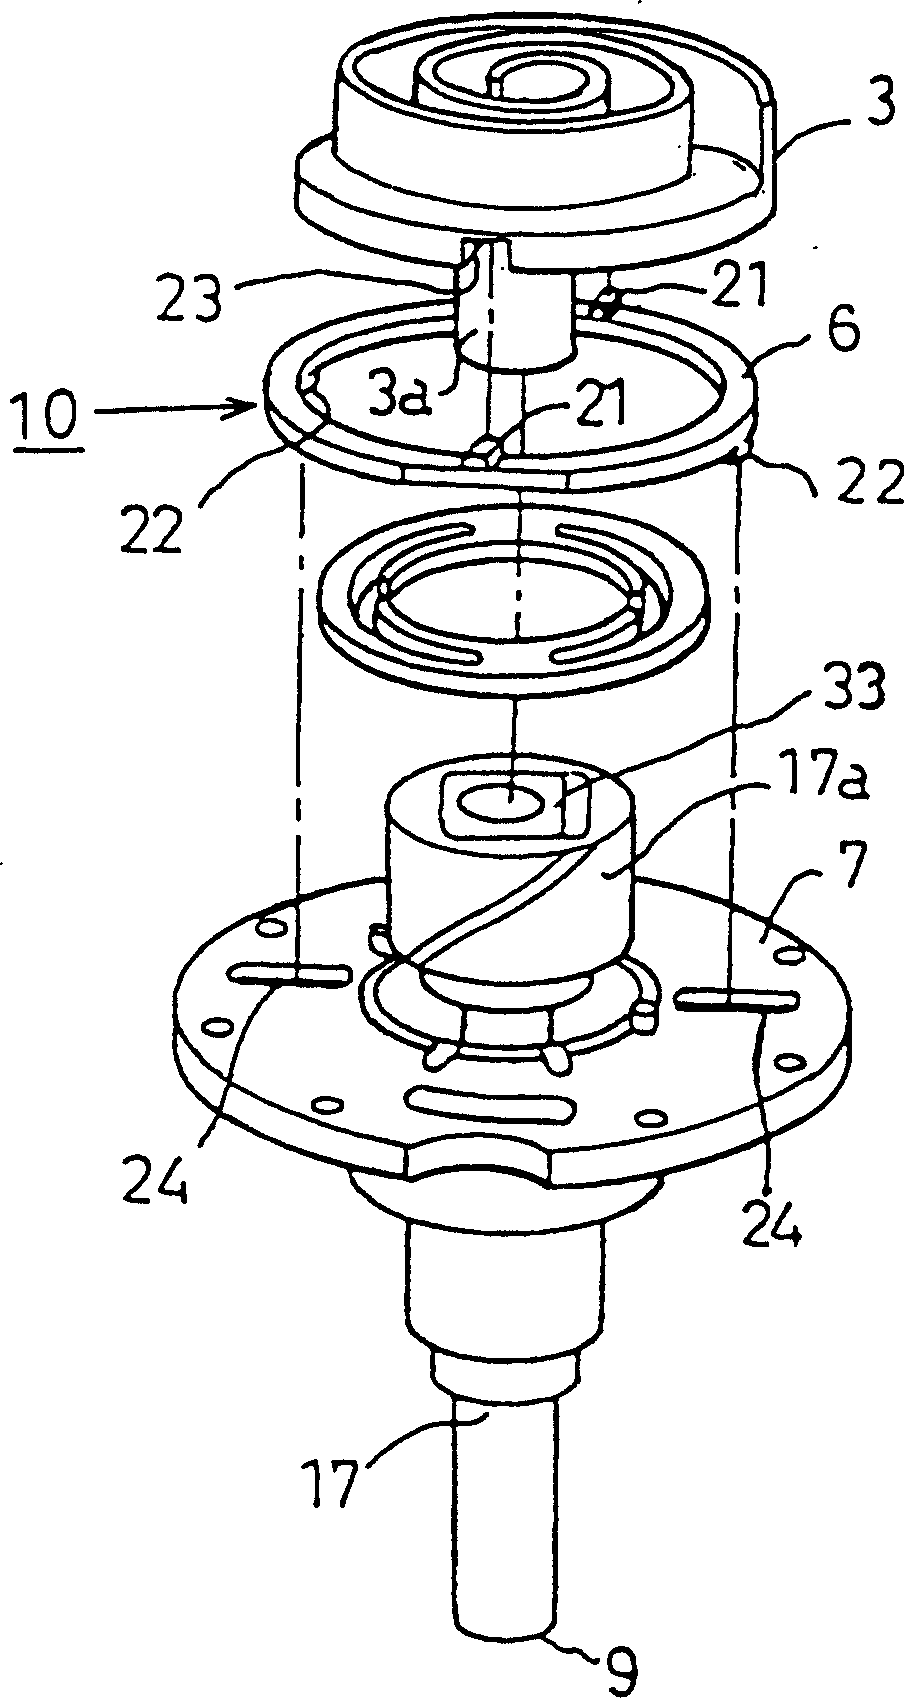 Method for mfg. vortex compressor and its cross ring